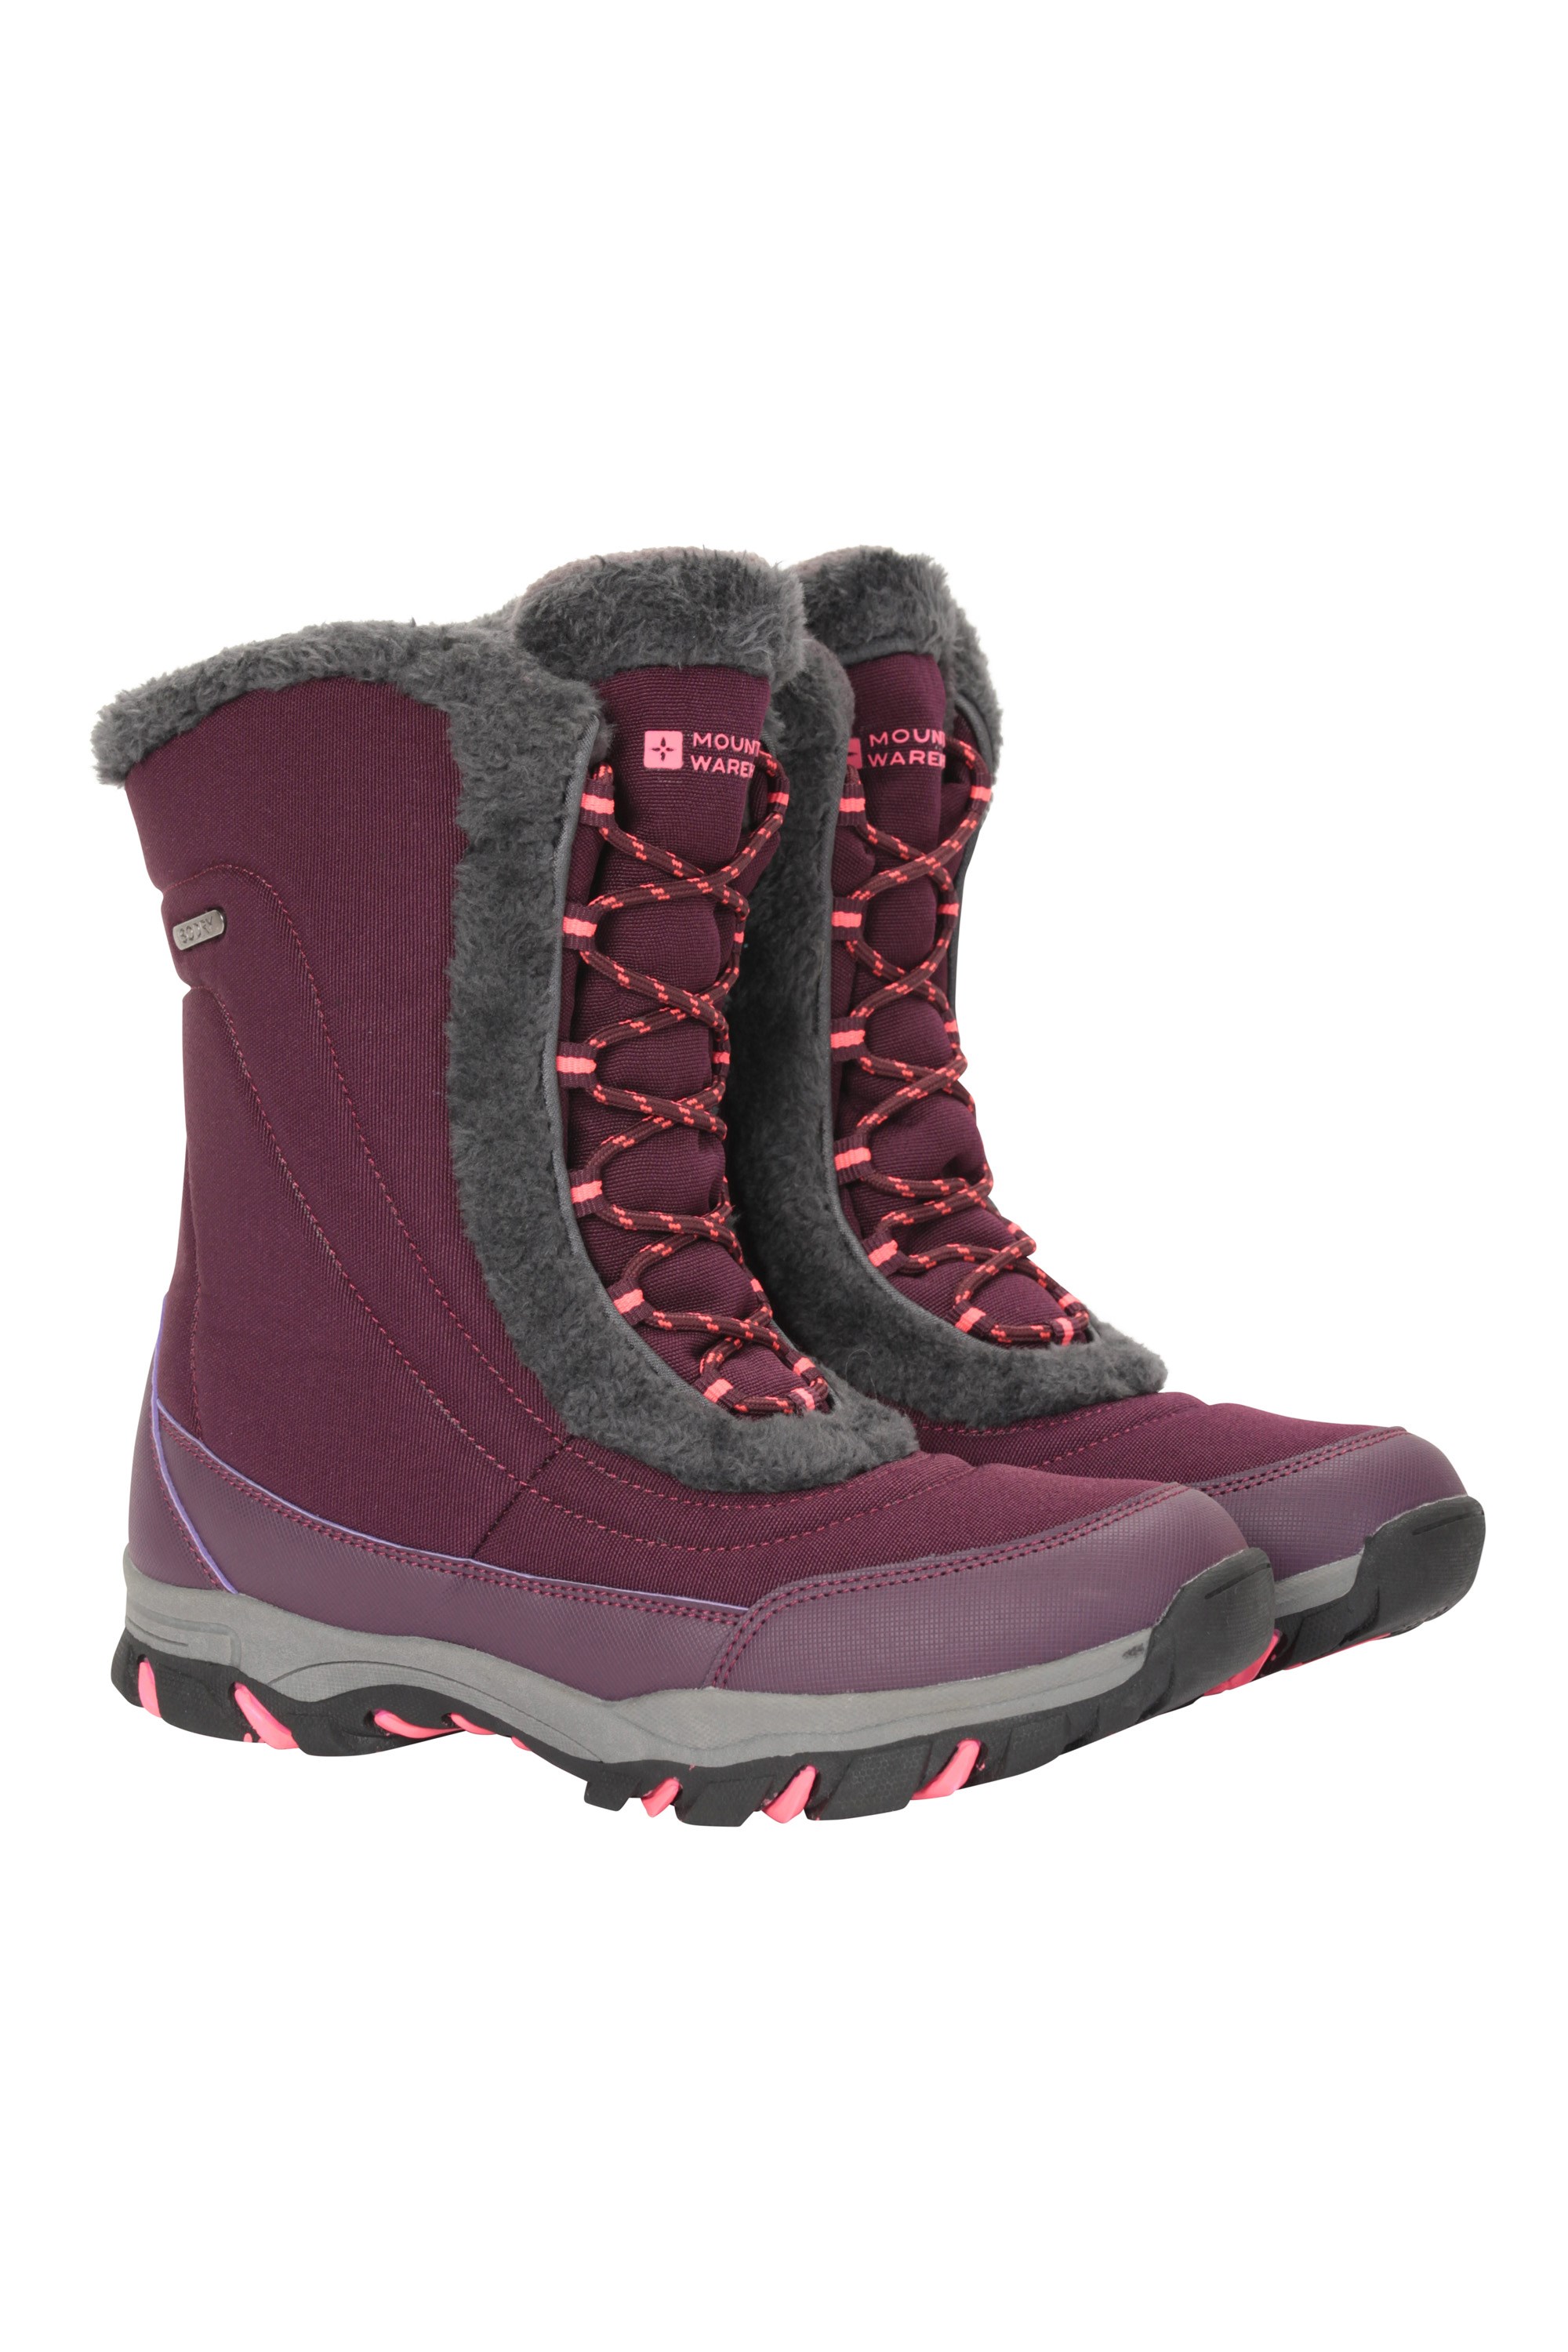 womens snow boots mountain warehouse